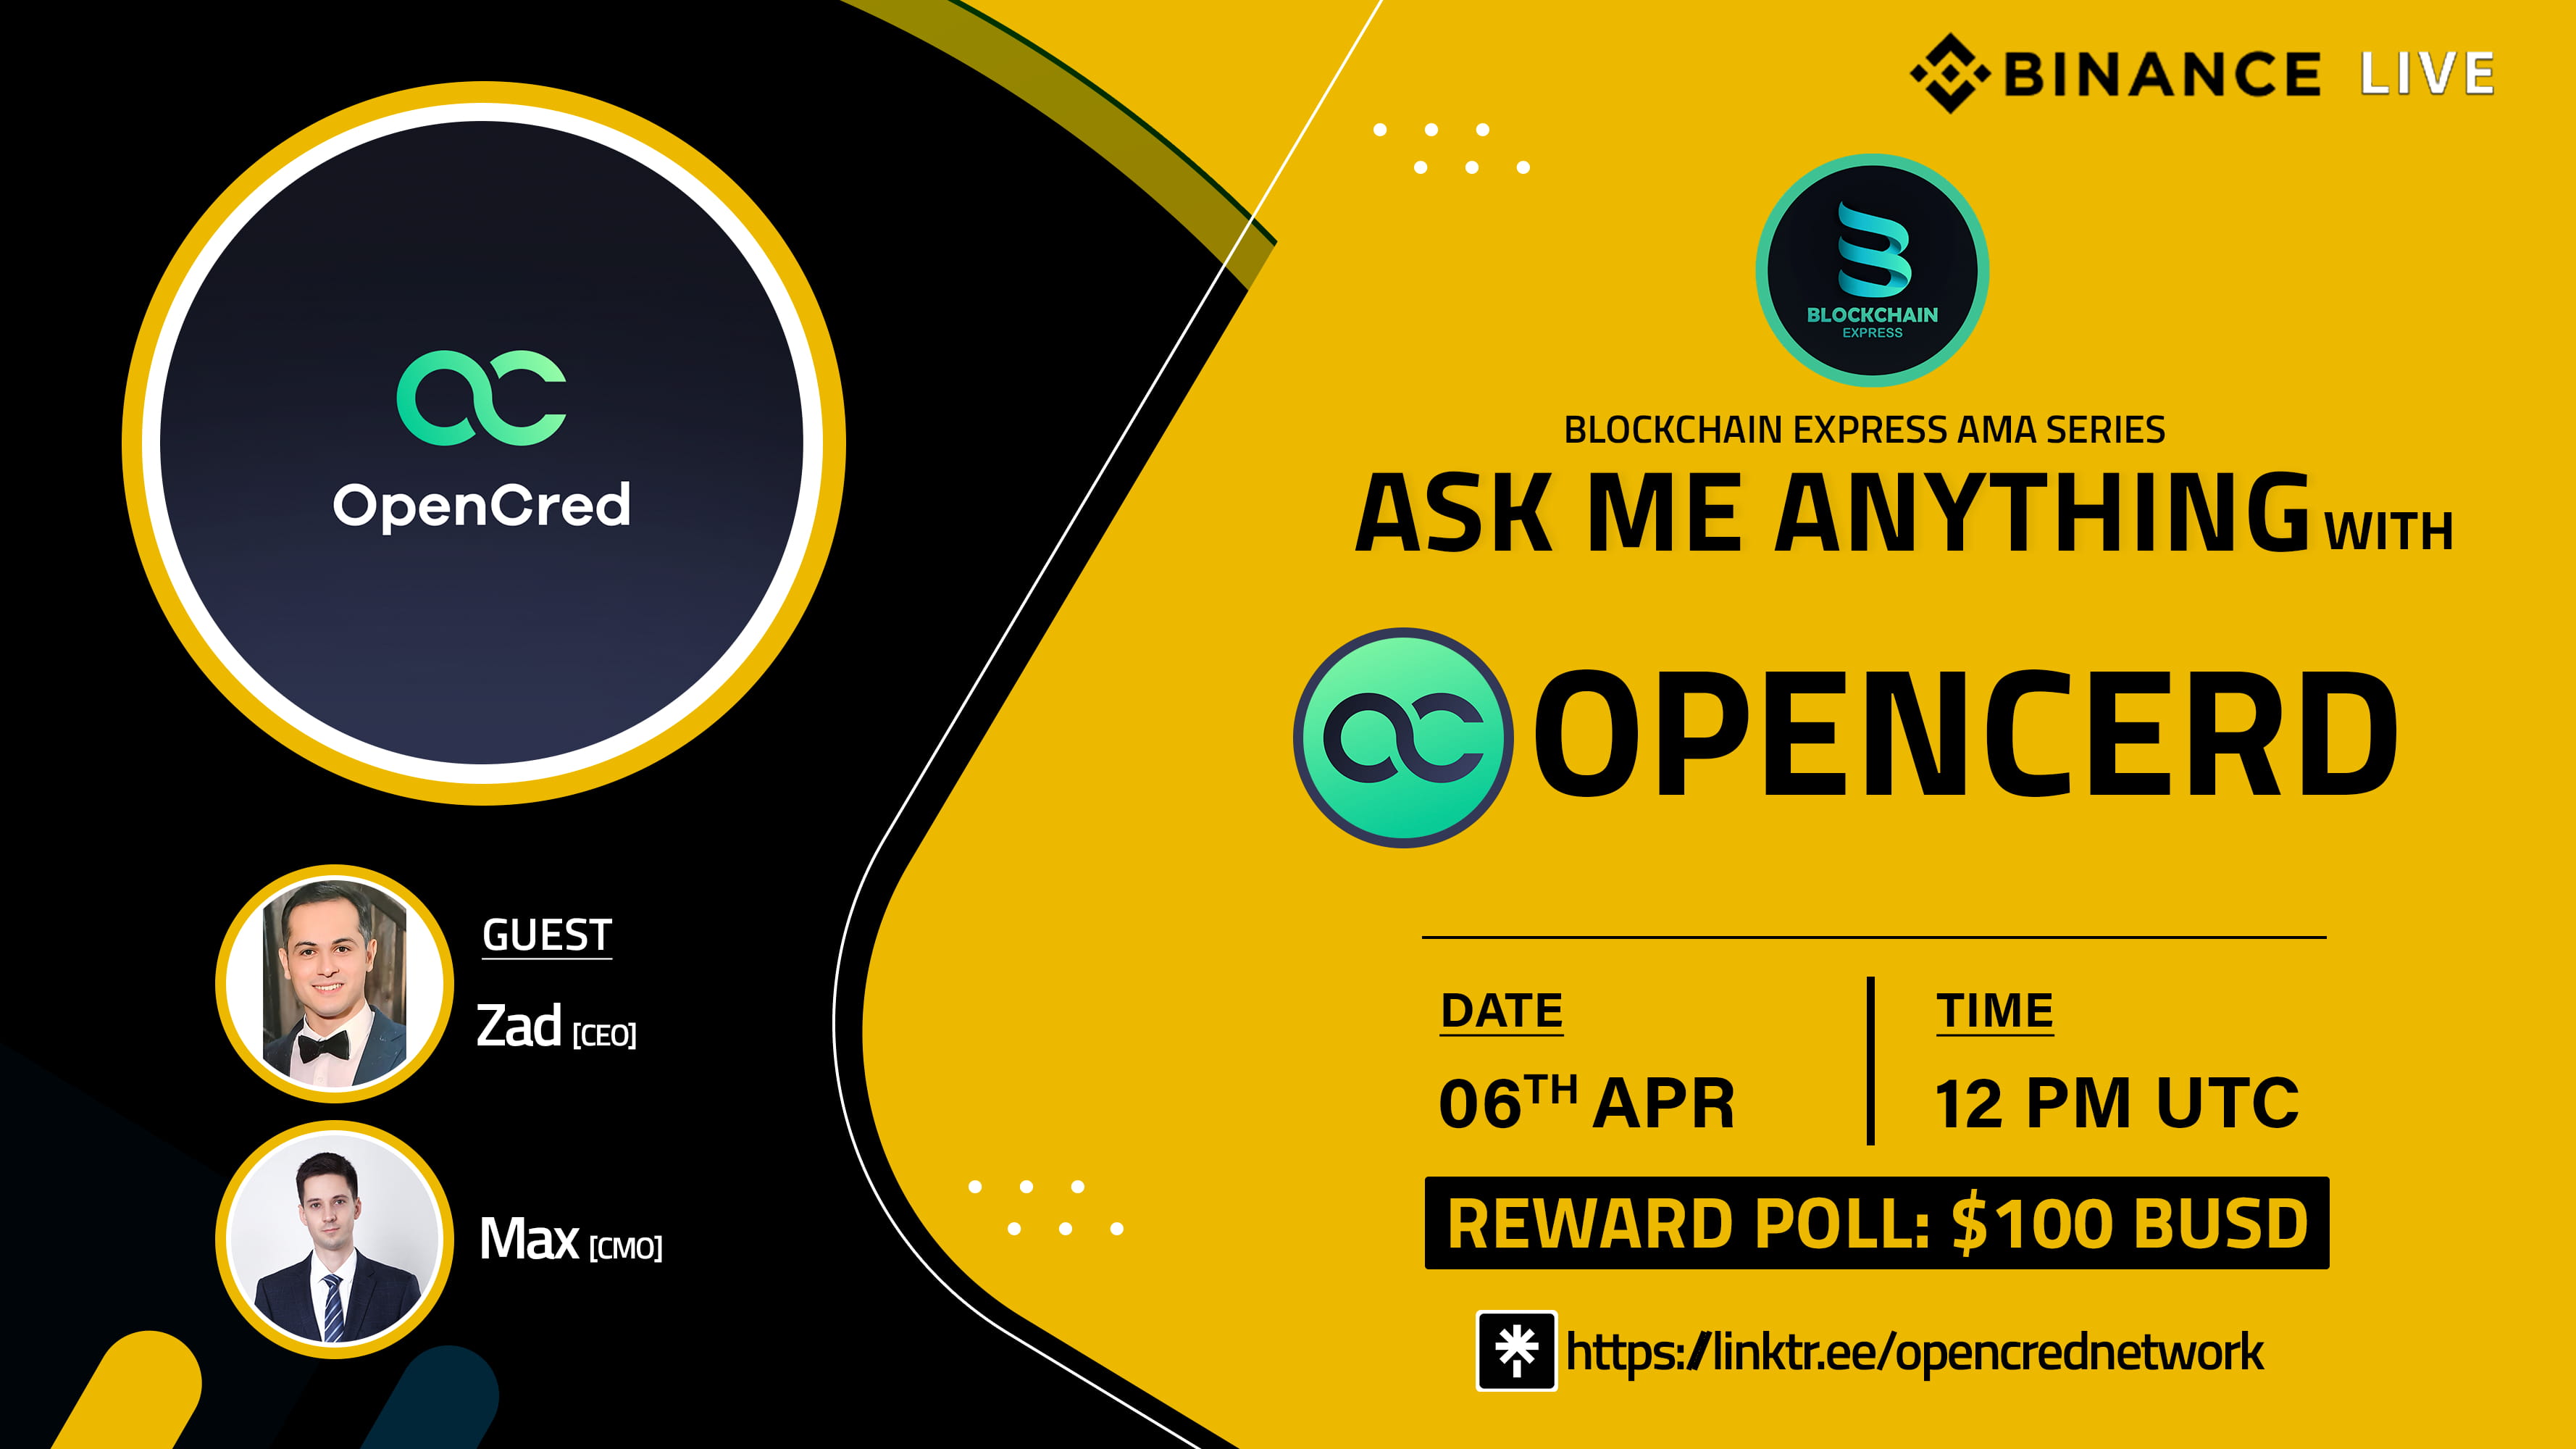 ₿lockchain Express will be hosting an AMA session with" Open Cred "